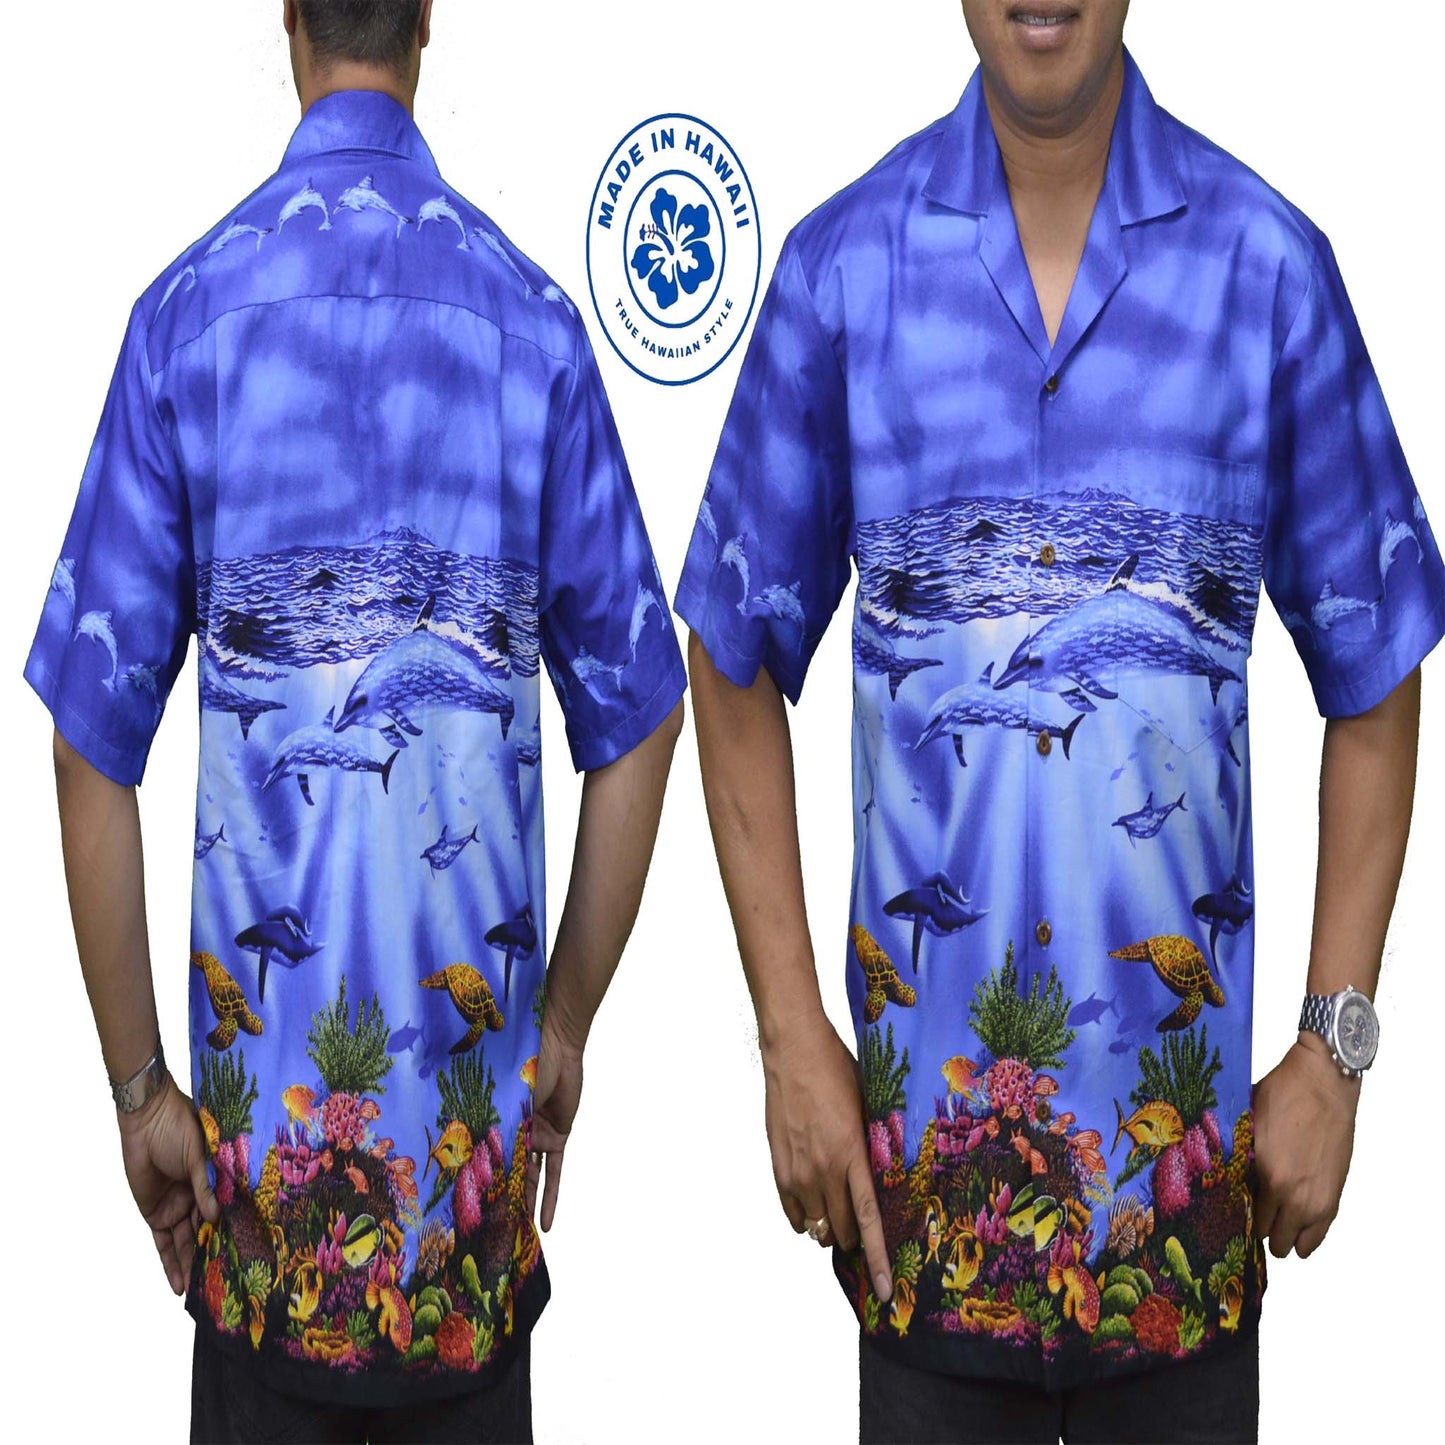 made in Hawaii aloha cotton Hawaiian shirt with whale in oceanic life in blue background